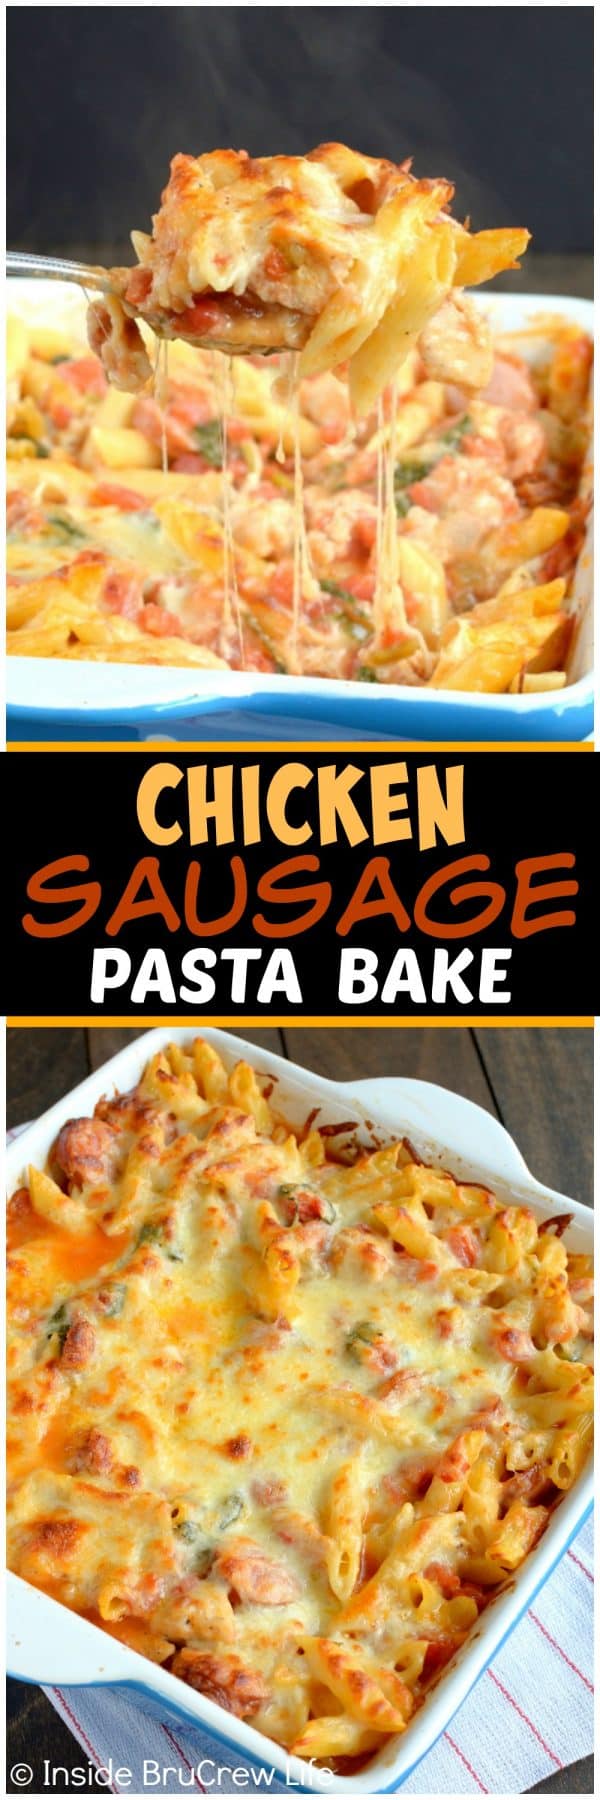 Chicken Sausage Pasta Bake - this easy pasta casserole is loaded with meat, cheese, and veggies. Great recipe to make for busy nights.